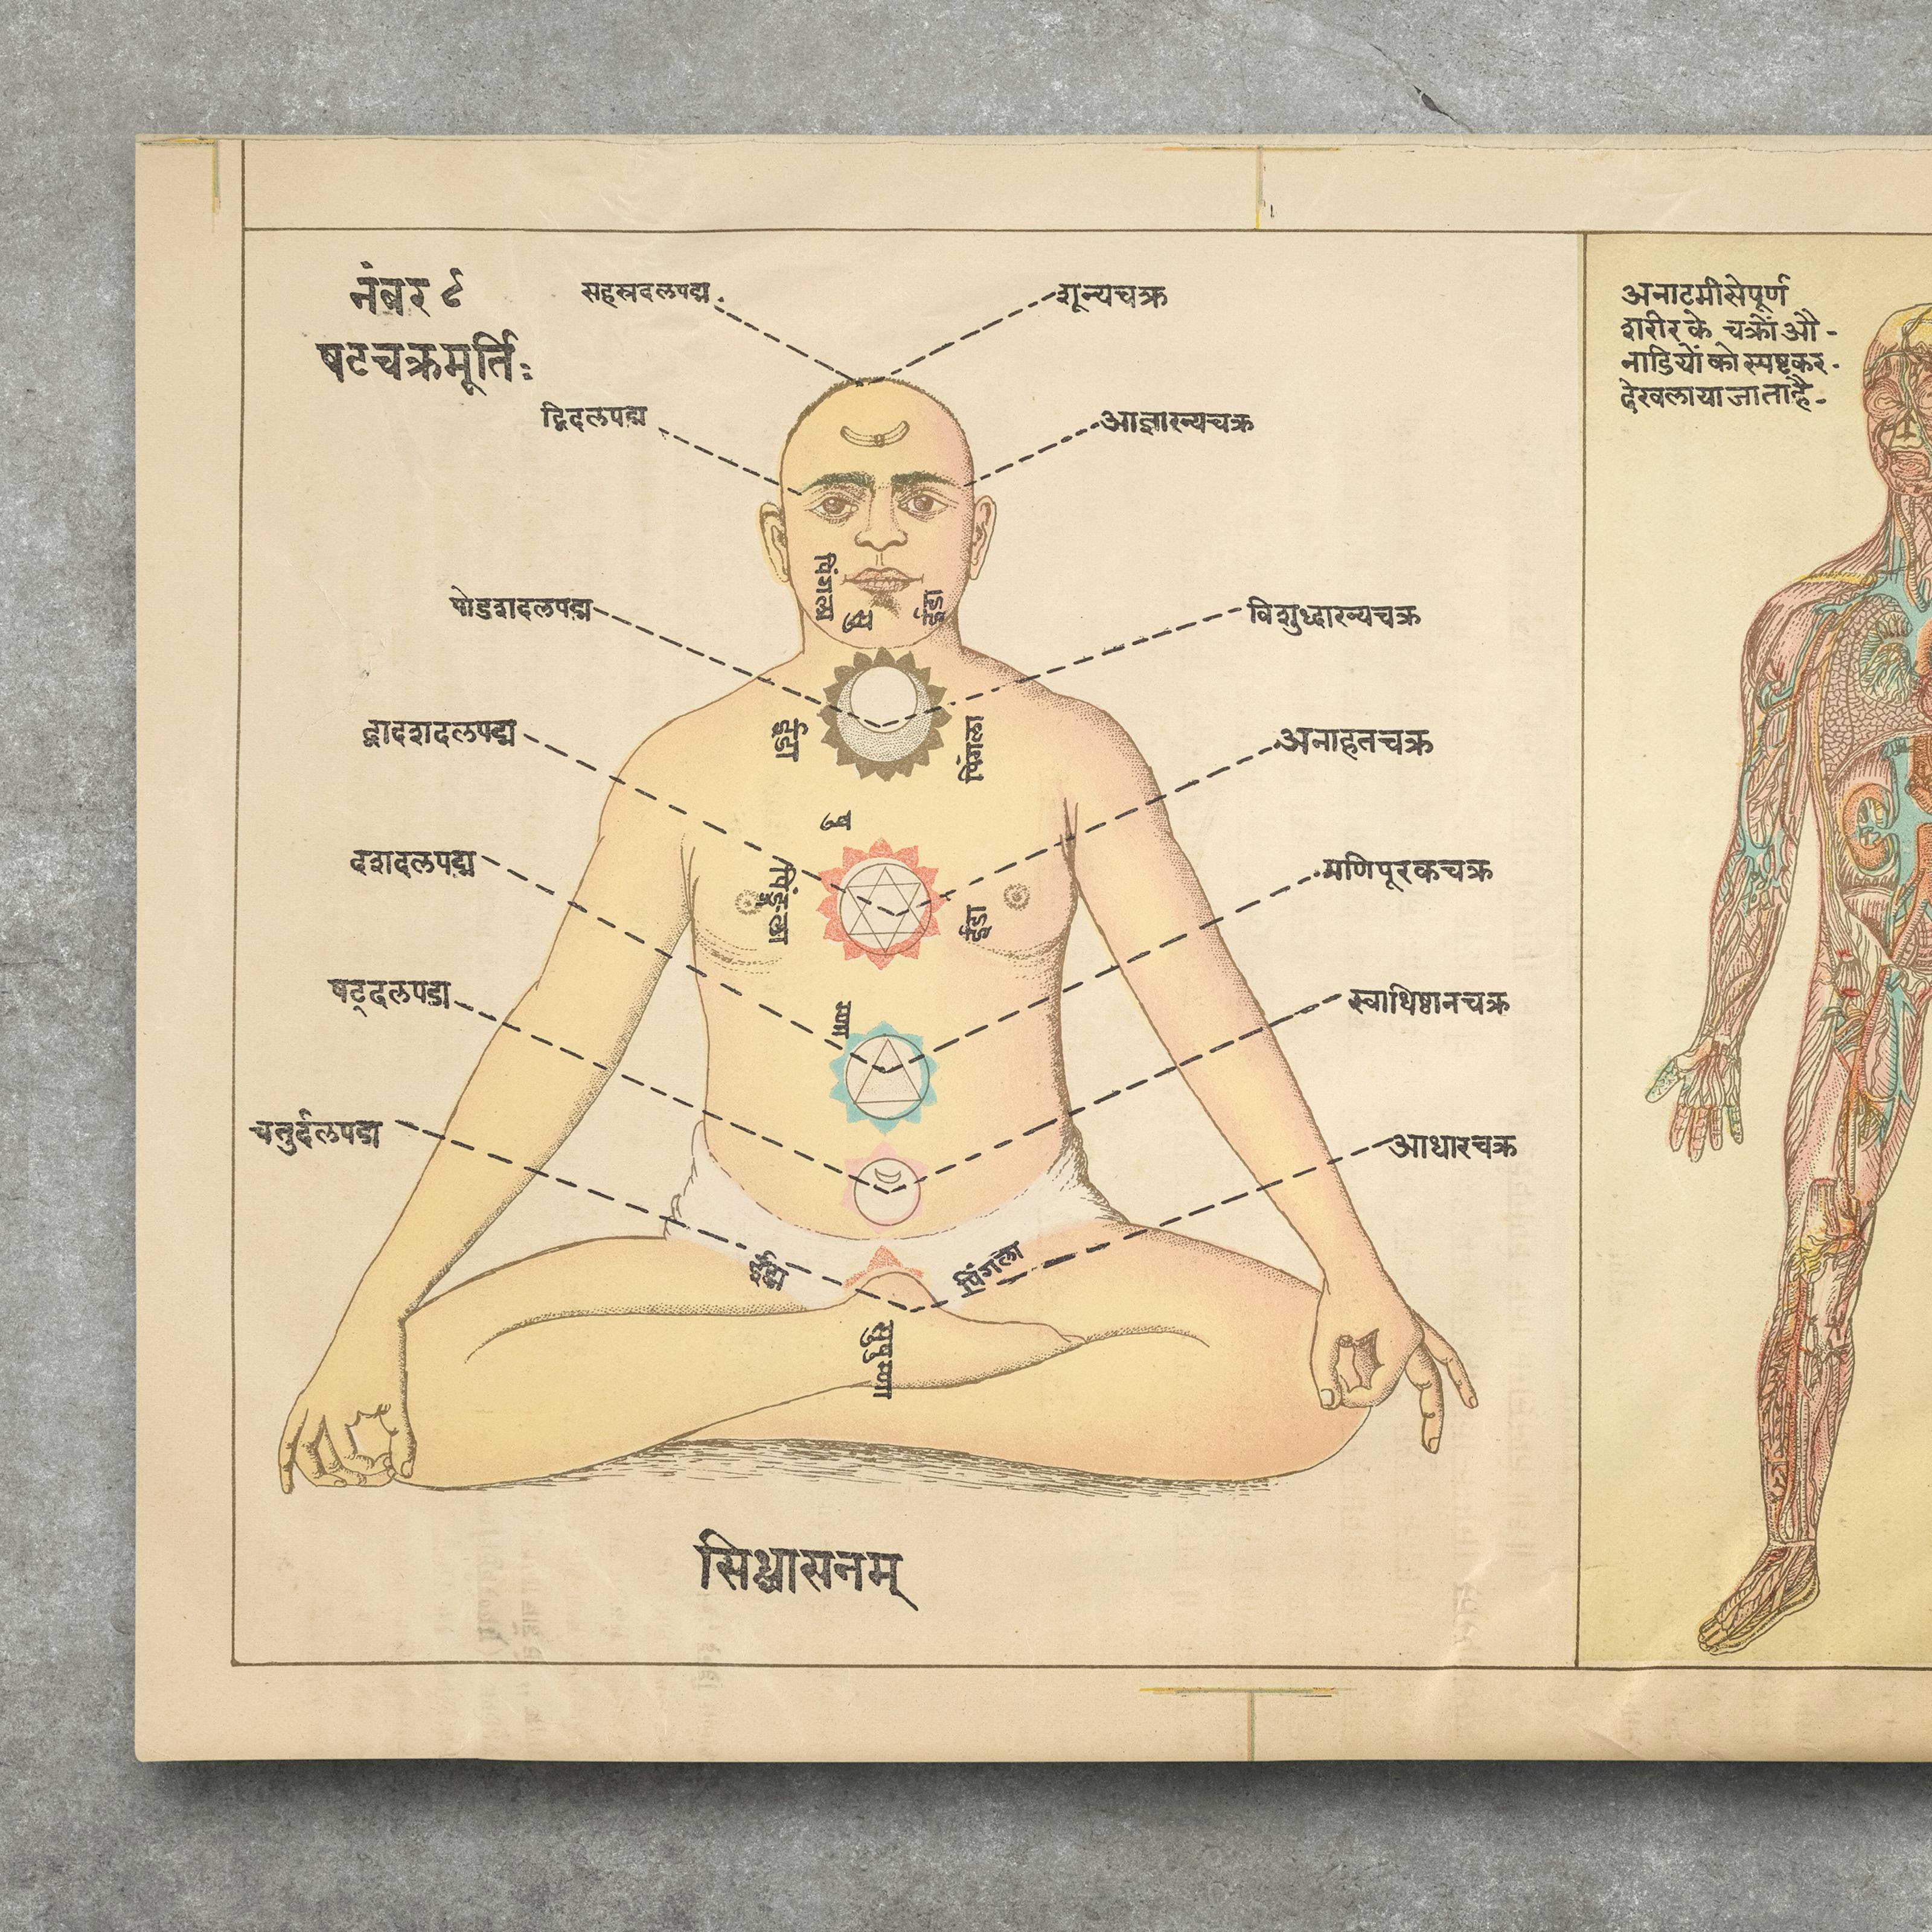 Two illustrations on yellowed paper. The illustration on the left shows a yogi sat cross-legged in a meditative pose looking straight ahead. There are a number of different-coloured symbols in a vertical line extending up the yogi's torso. There are dotted lines leading out of the symbols with Sanskrit writing at the end of the lines. The illustration on the right shows an anatomical illustration of the inside of a human body, with veins and organs depicted. 